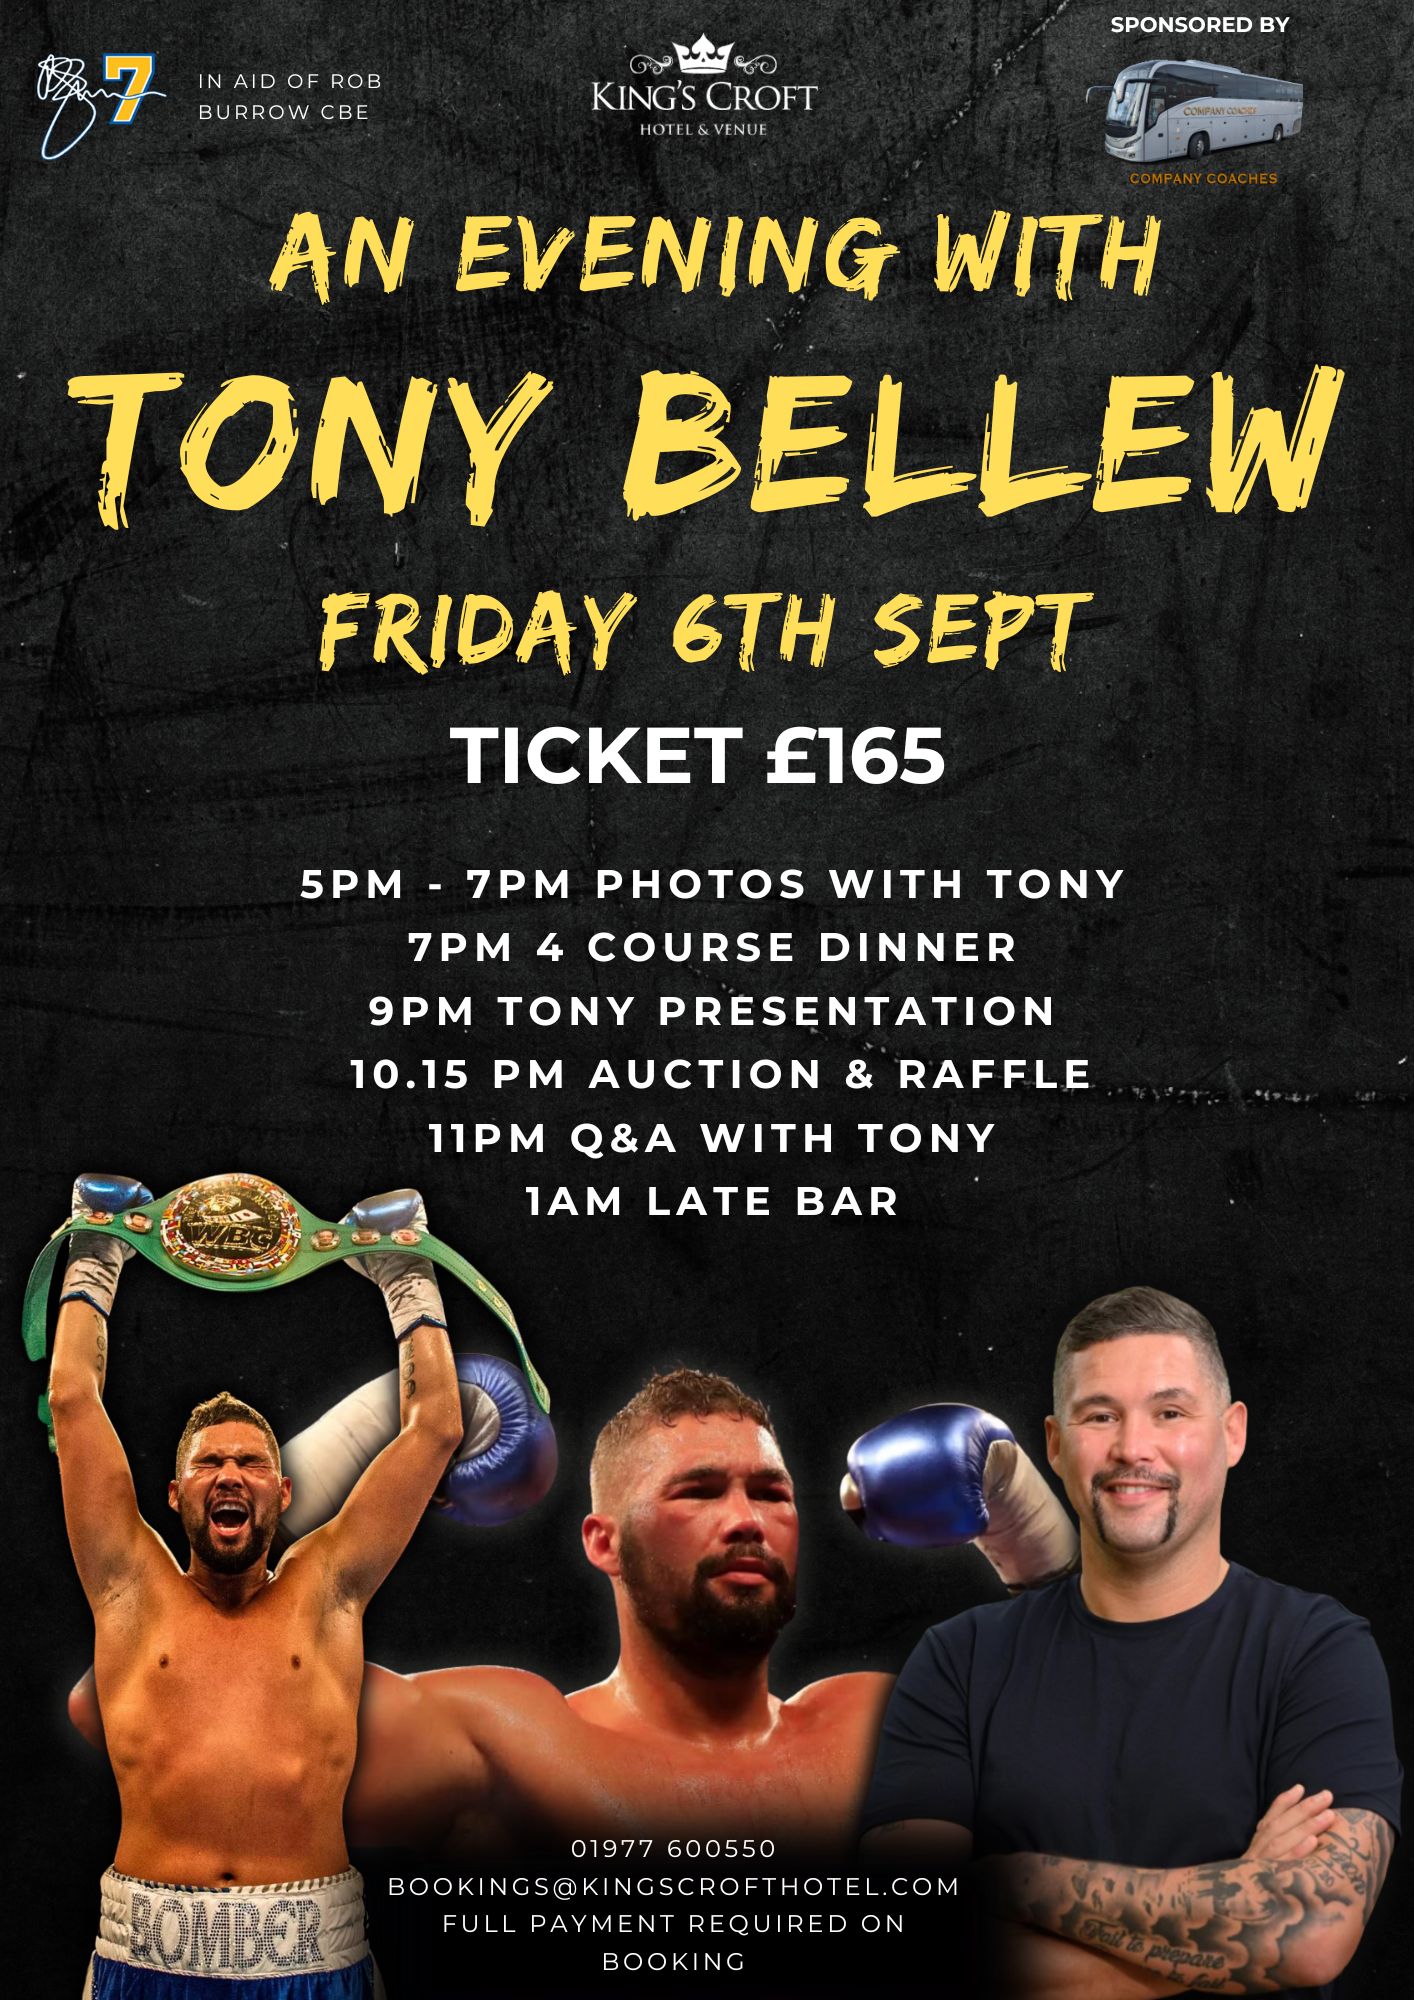 An Evening with Tony Bellew